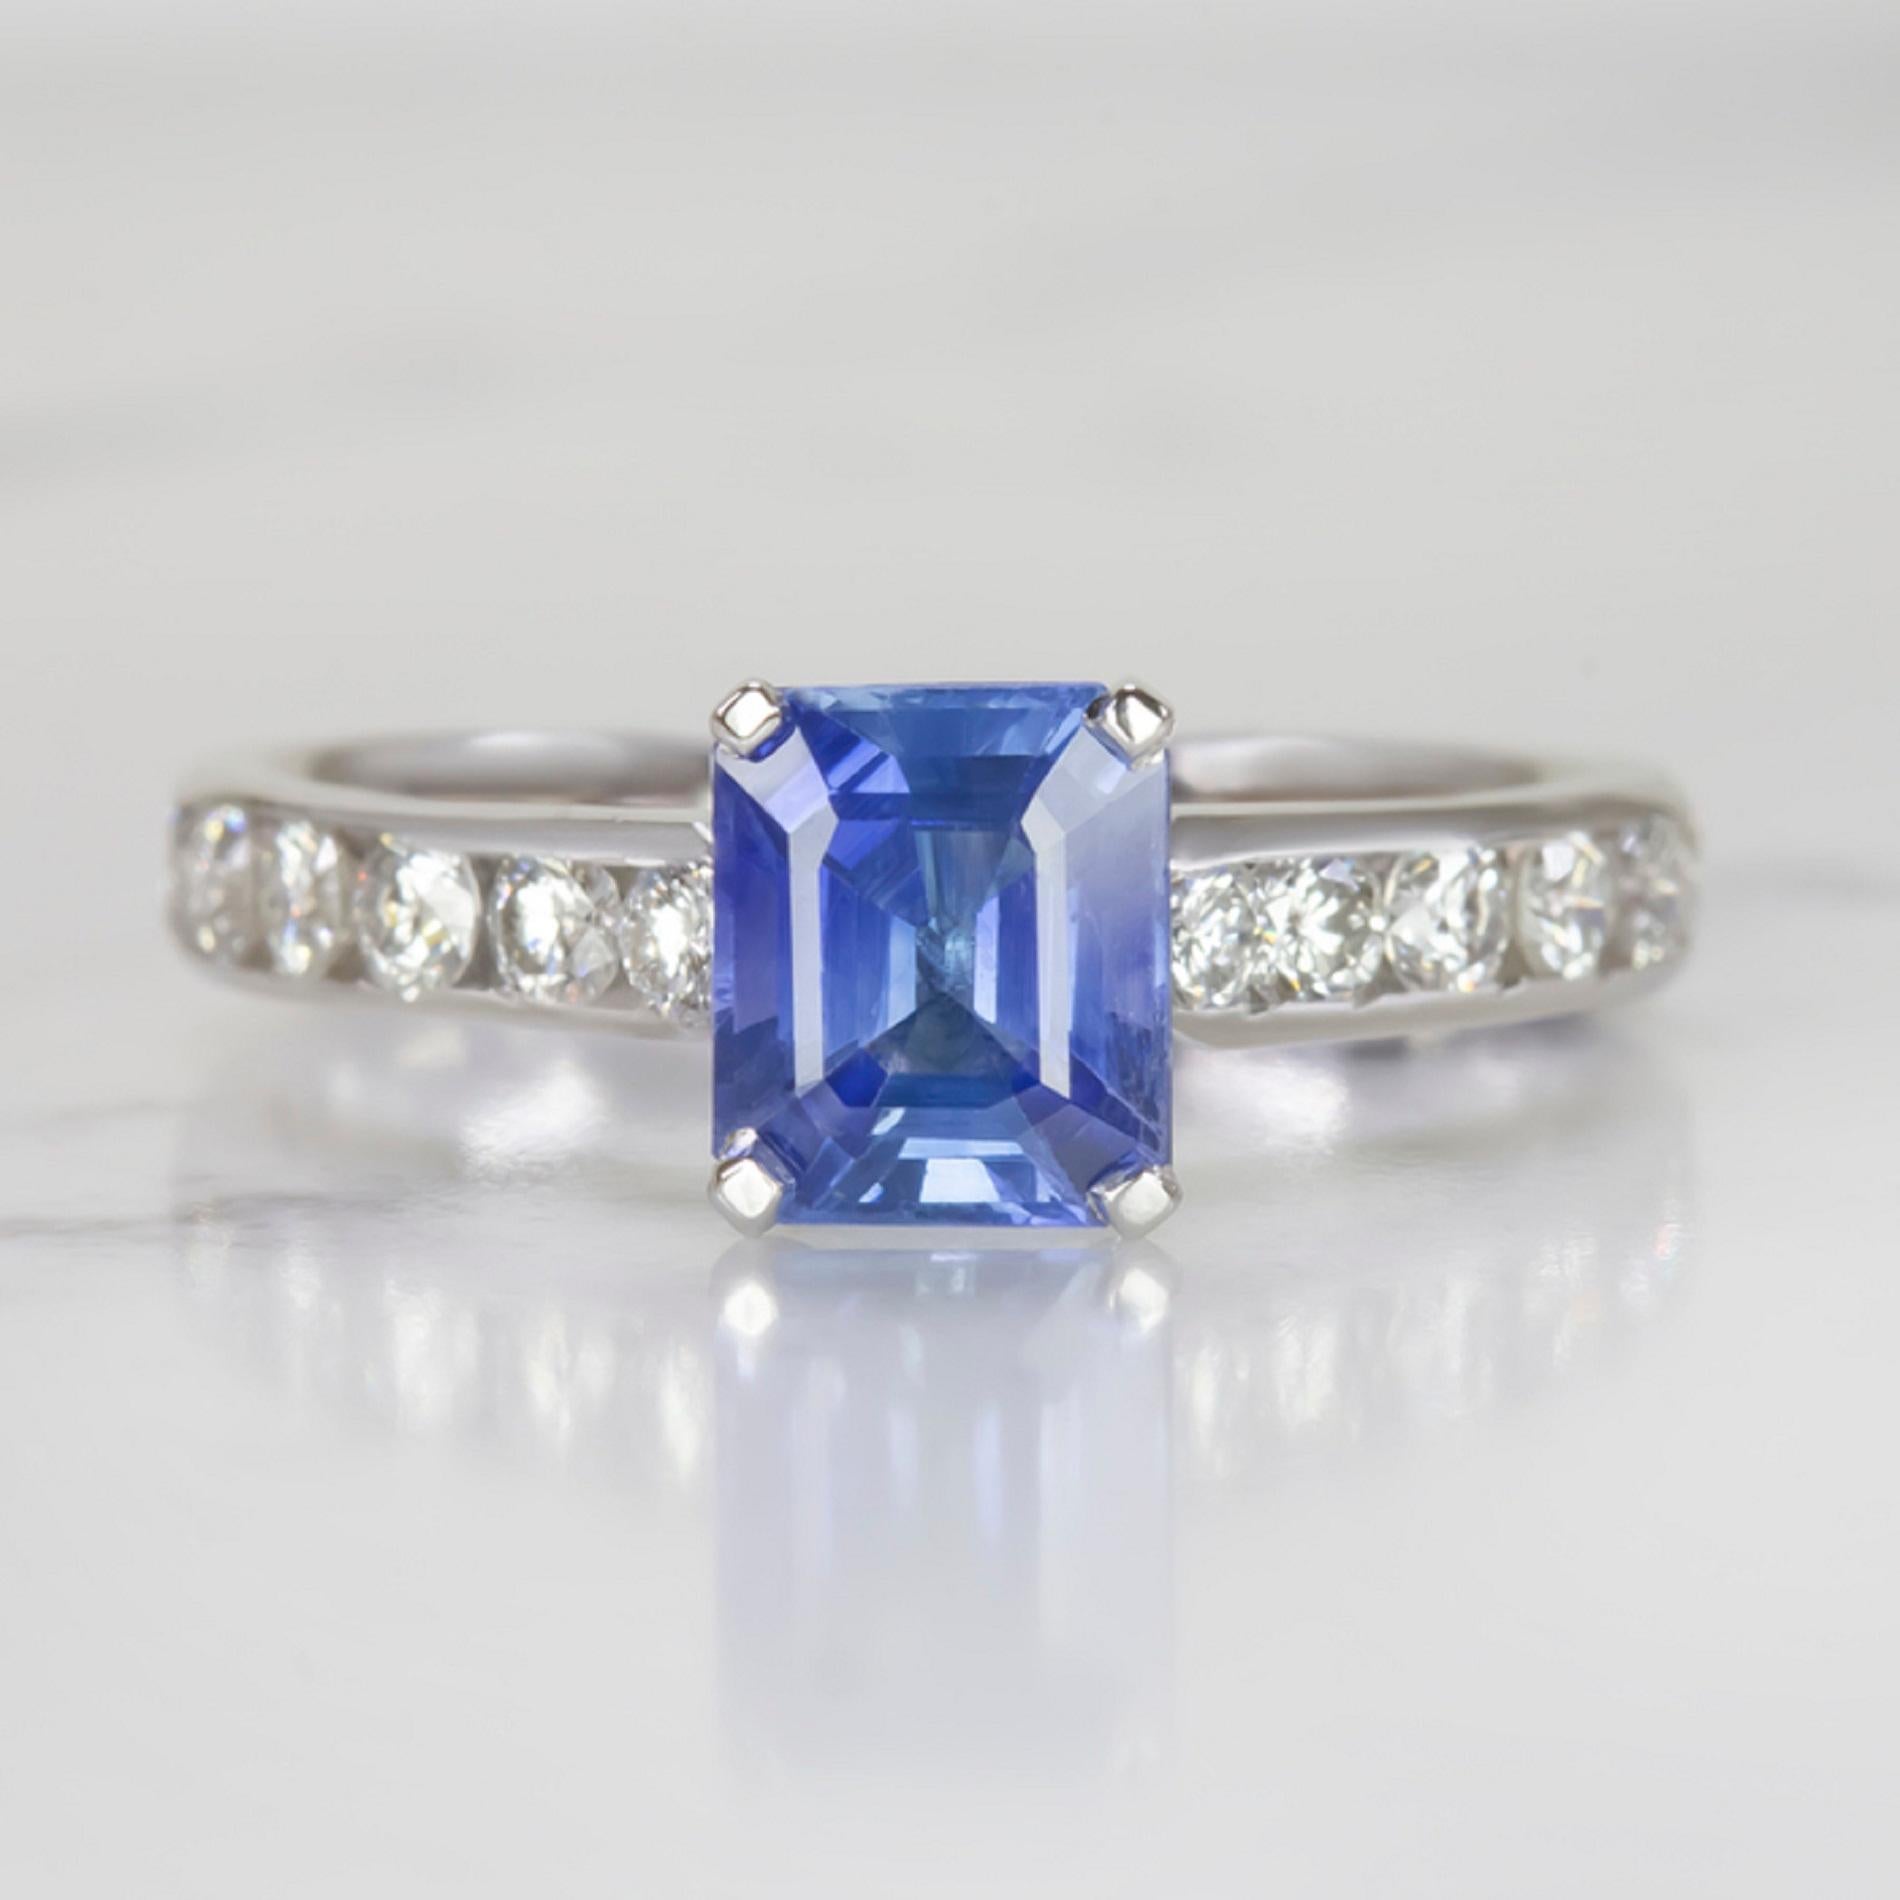  stunning sapphire and diamond ring is positively gleaming with eye catching sparkle! The 1.28 carat sapphire center has a beautiful cornflower blue hue and sparkles with gorgeous brilliance. The shoulders of the classic setting glitter with vibrant